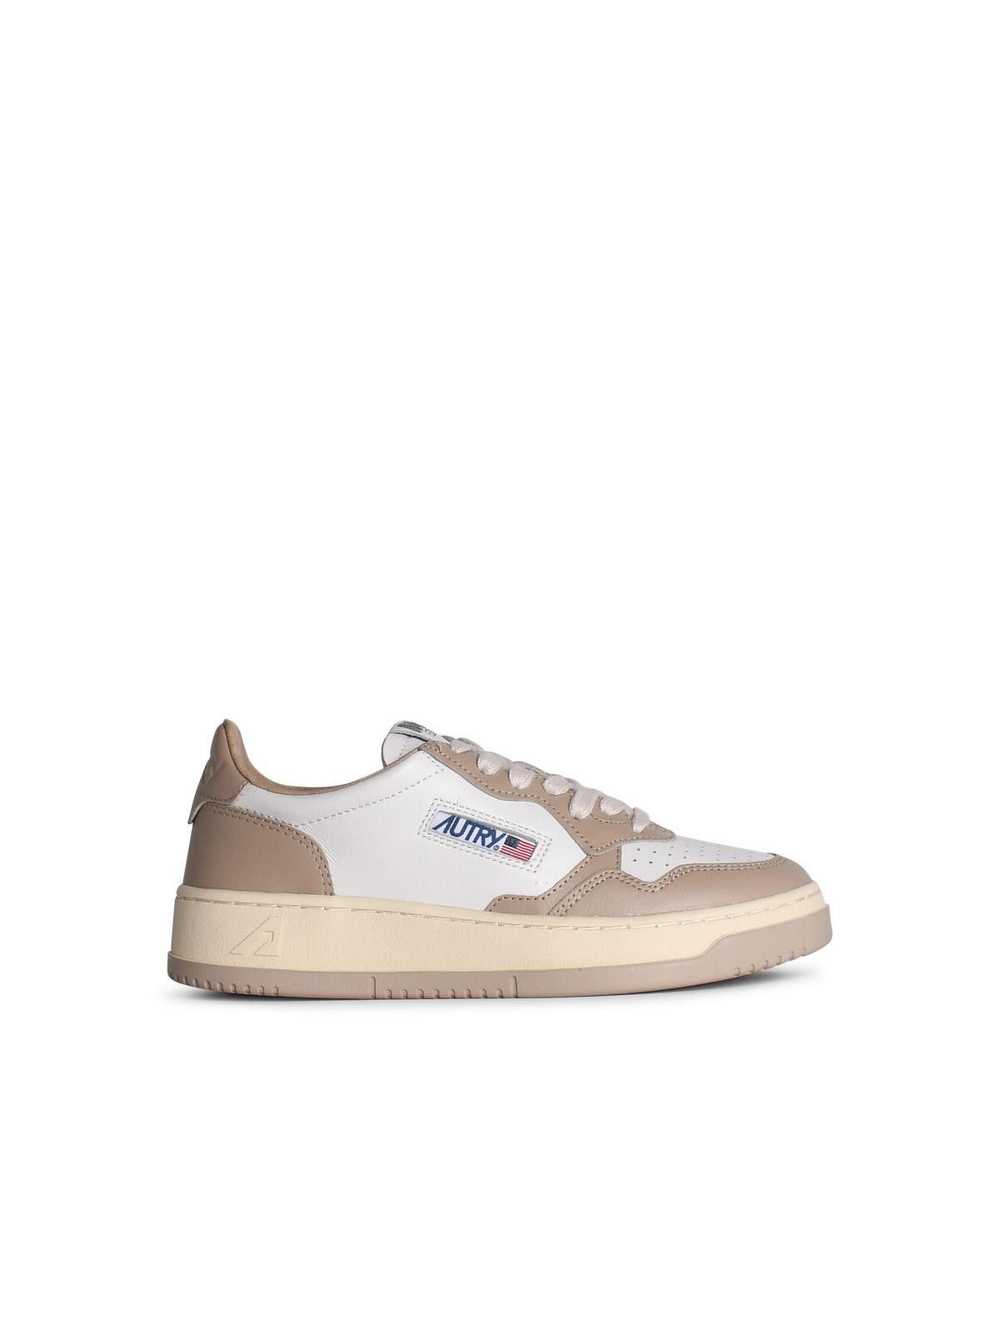 Autry Autry 'medalist' White Leather Sneakers - image 1